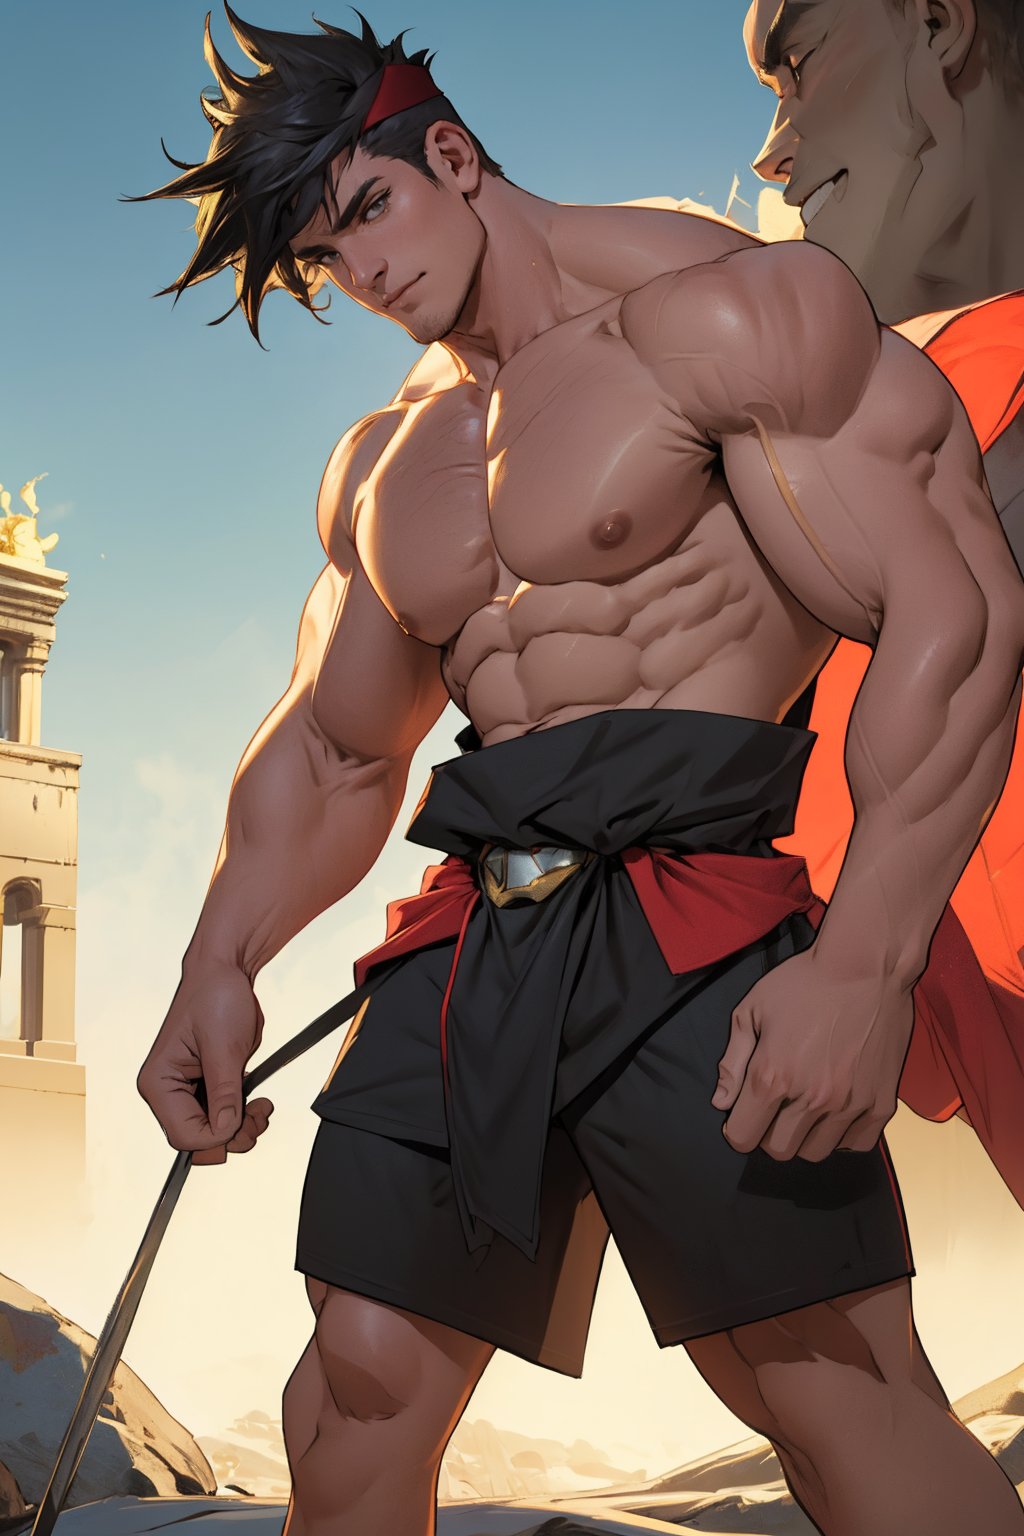 Golden light illuminates Zagreus' chiseled physique, capturing the broad chest, bulging biceps, and powerful shoulders in a close-up shot. The camera frames his muscular form against a neutral background, emphasizing the contours of his body as he stands confidently with even weight distribution on both feet, highlighting every defined muscle fiber.